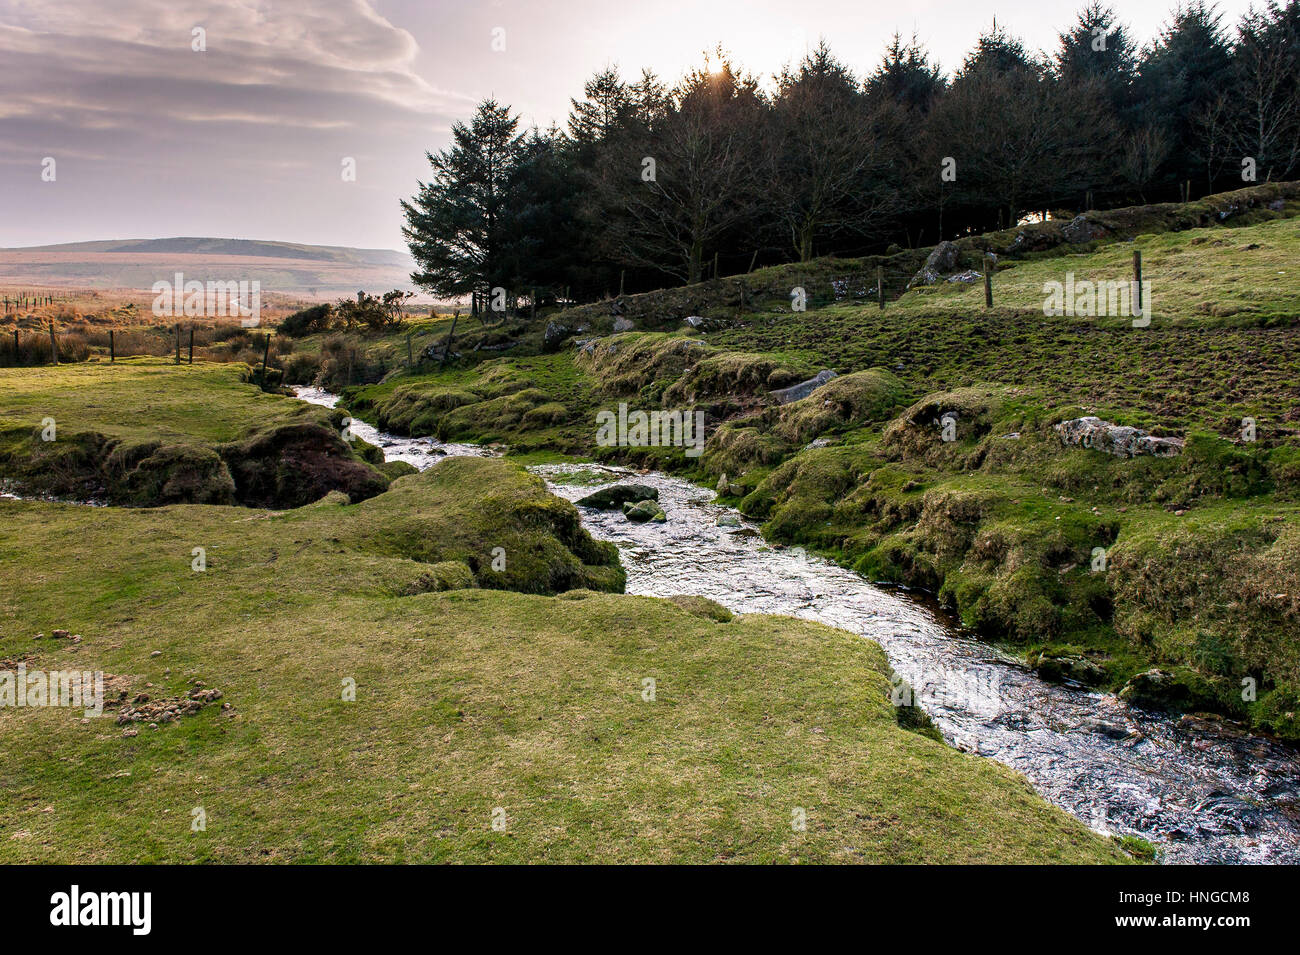 A small river runs through marshy ground on Rough Tor, an area designated as an area of Outstanding Natural Beauty on Bodmin Moor in Cornwall. Stock Photo